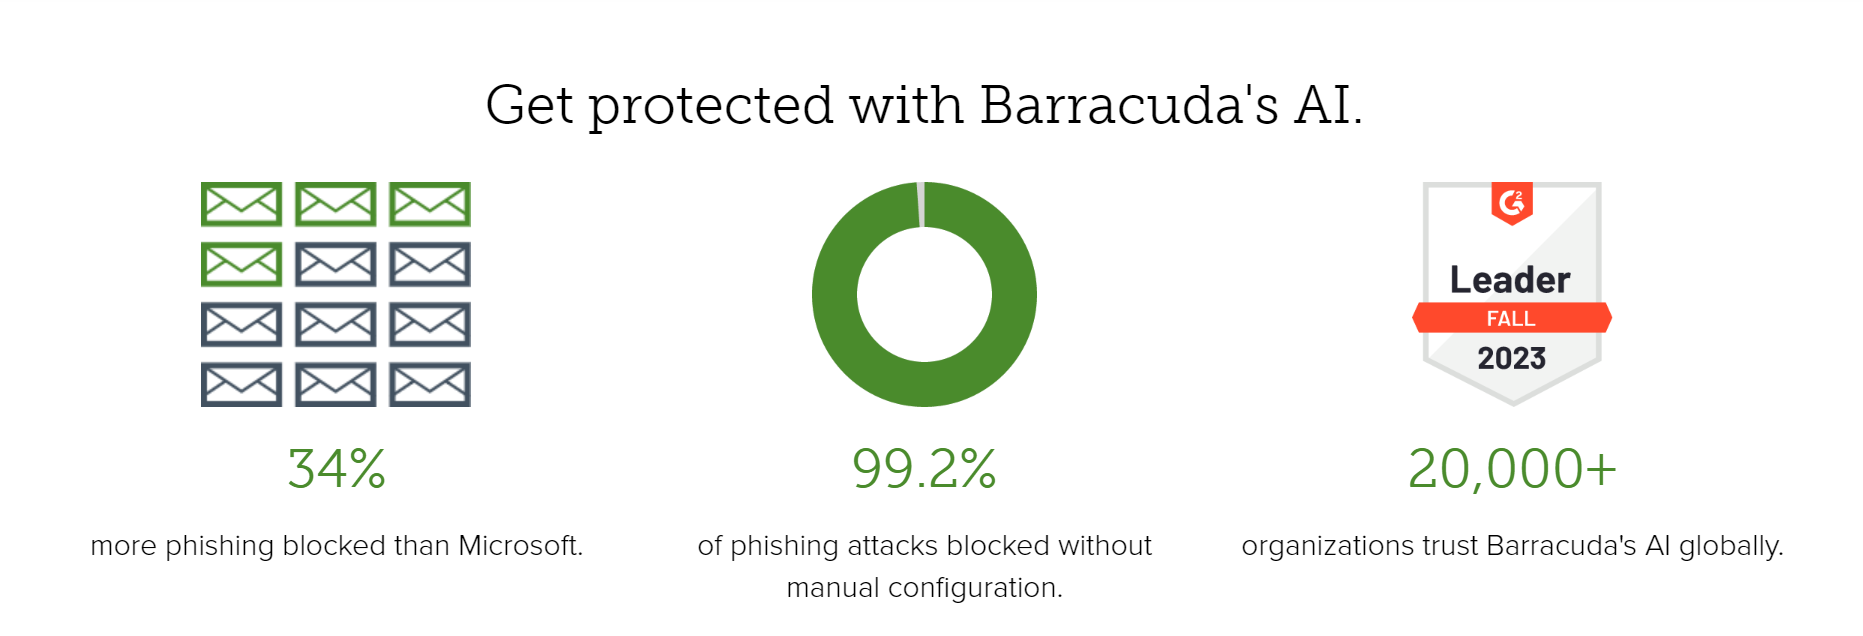 Barracuda's landing page explains how its AI-powered tool helps customers block more phishing attacks